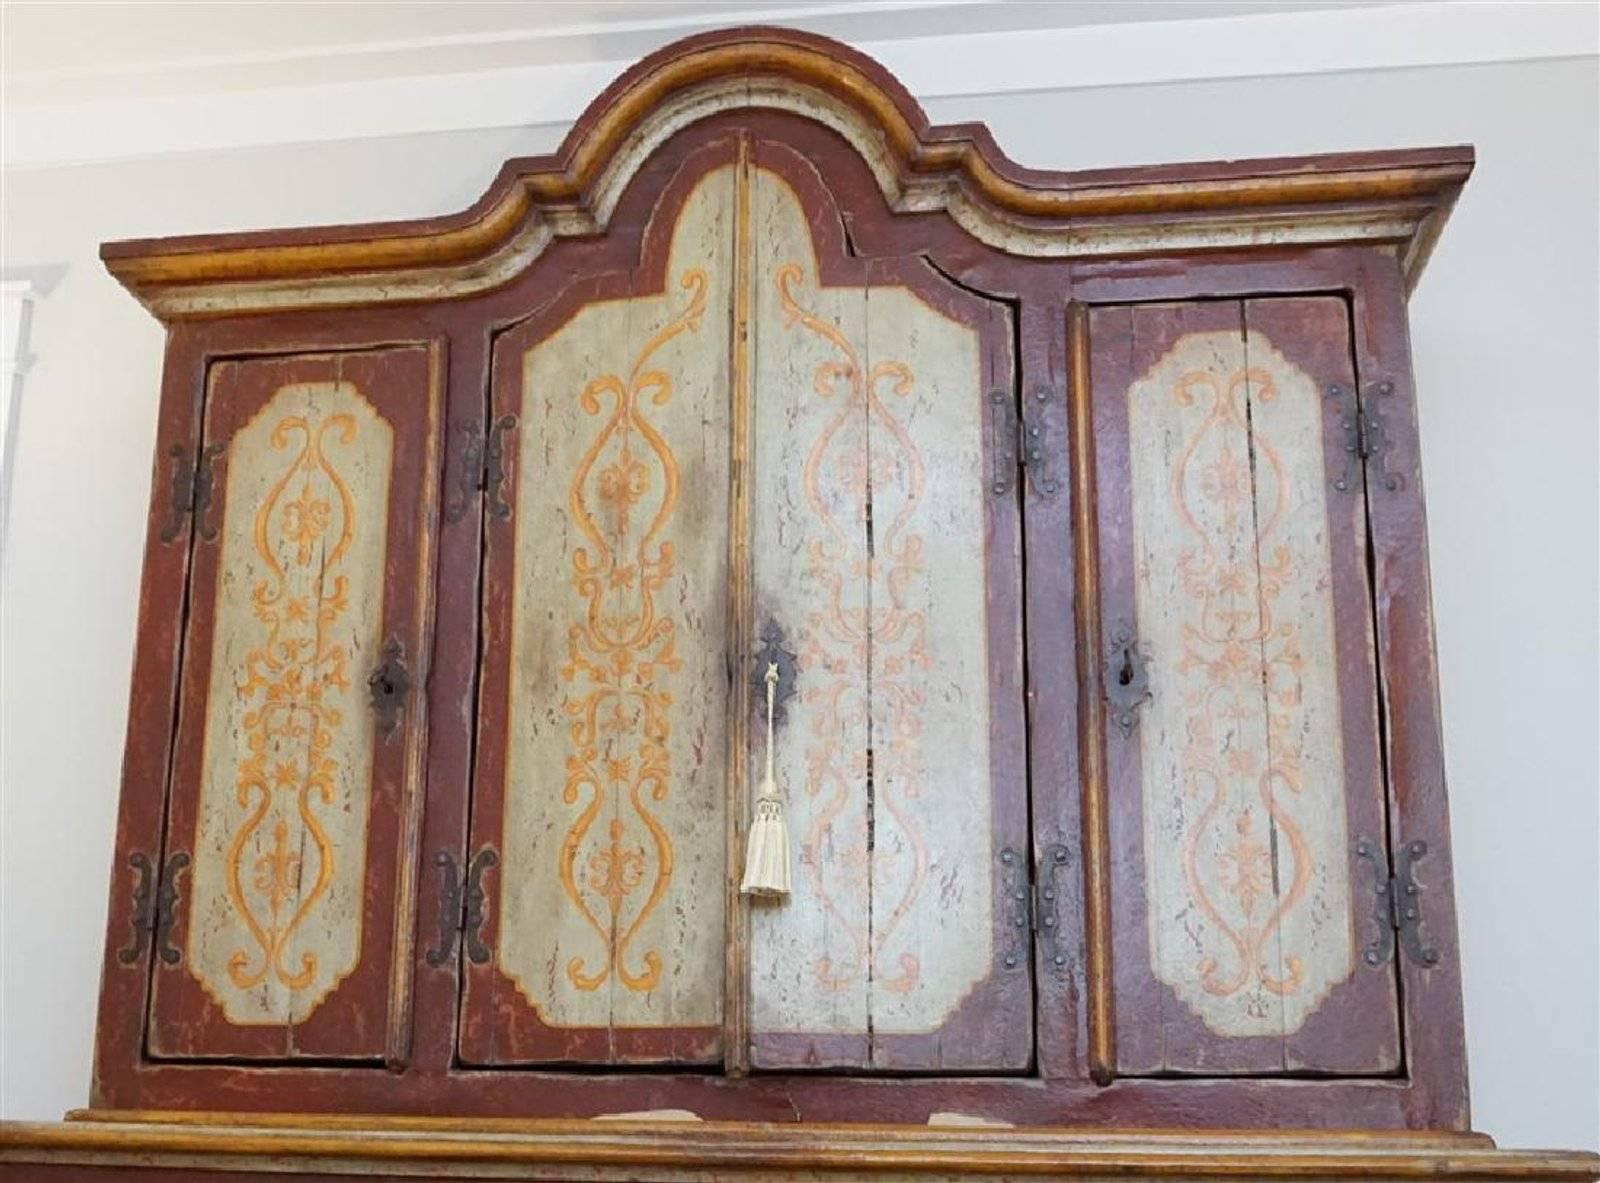 Late 18th century Tyrolean tall cabinet. Made in two parts with arched cornice above four paneled and decorated doors concealing shaped shelves. The lower section with four further paneled doors all retaining the original painted decoration. Tyrol